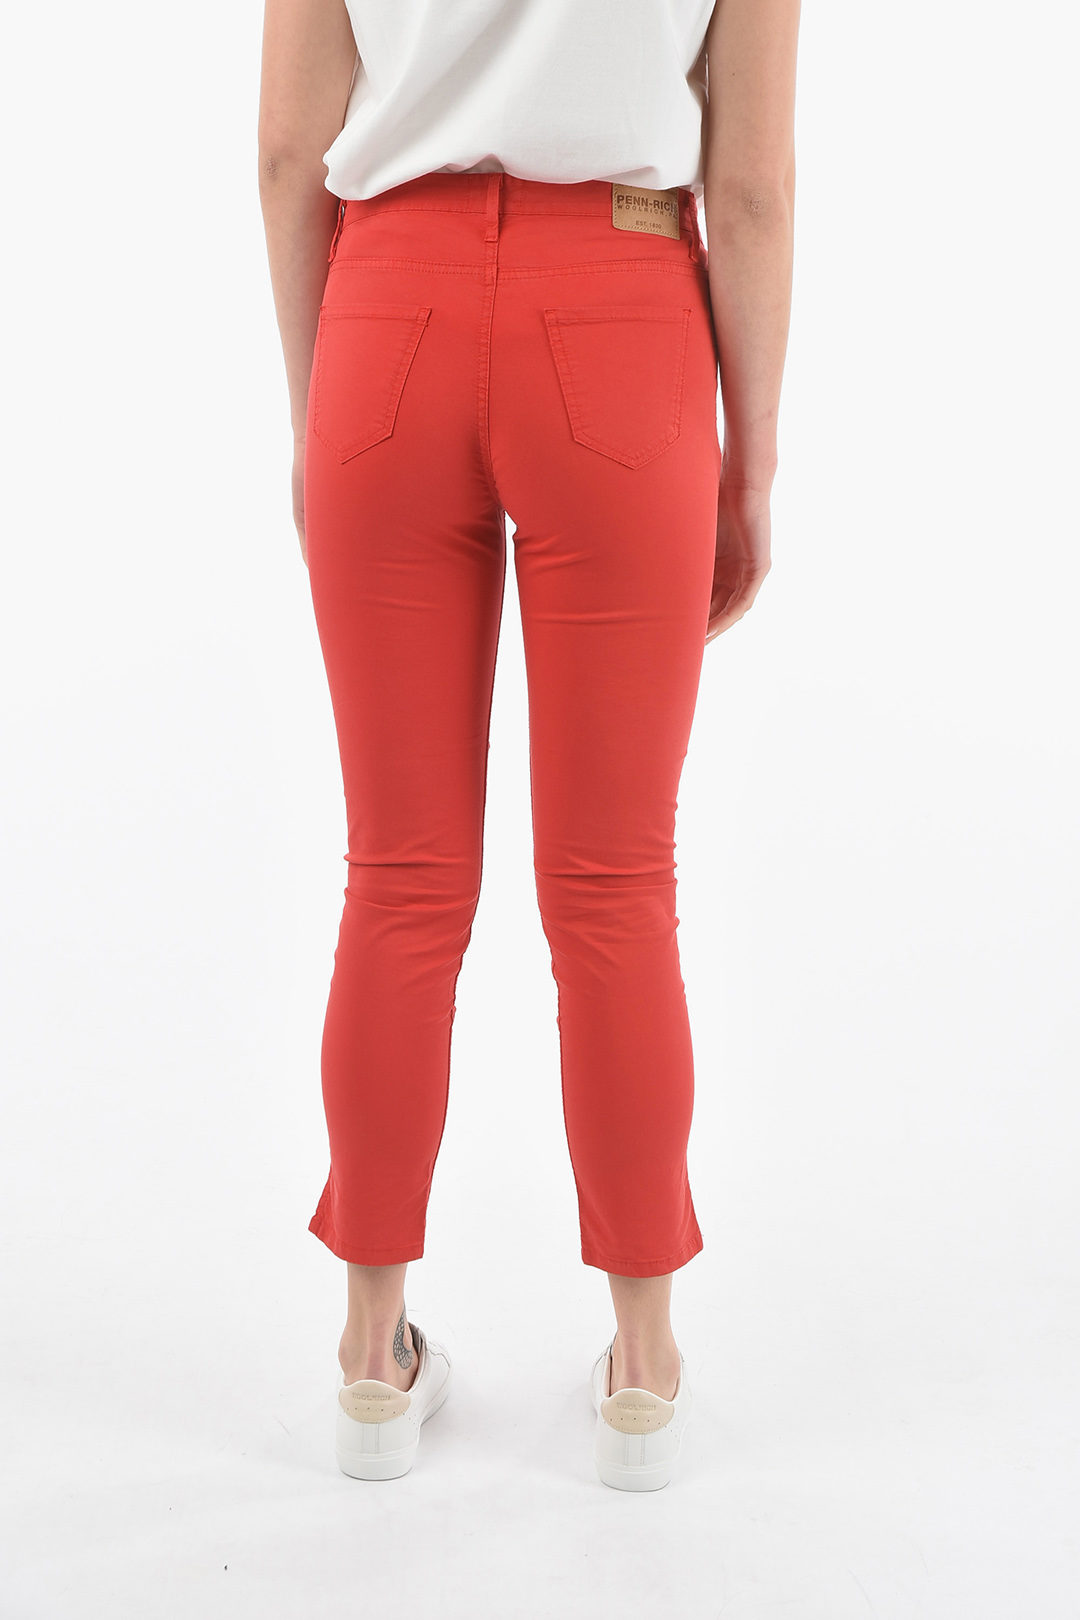 Ladies Cropped Trousers Rich Cotton Elasticated Zip Pockets Women